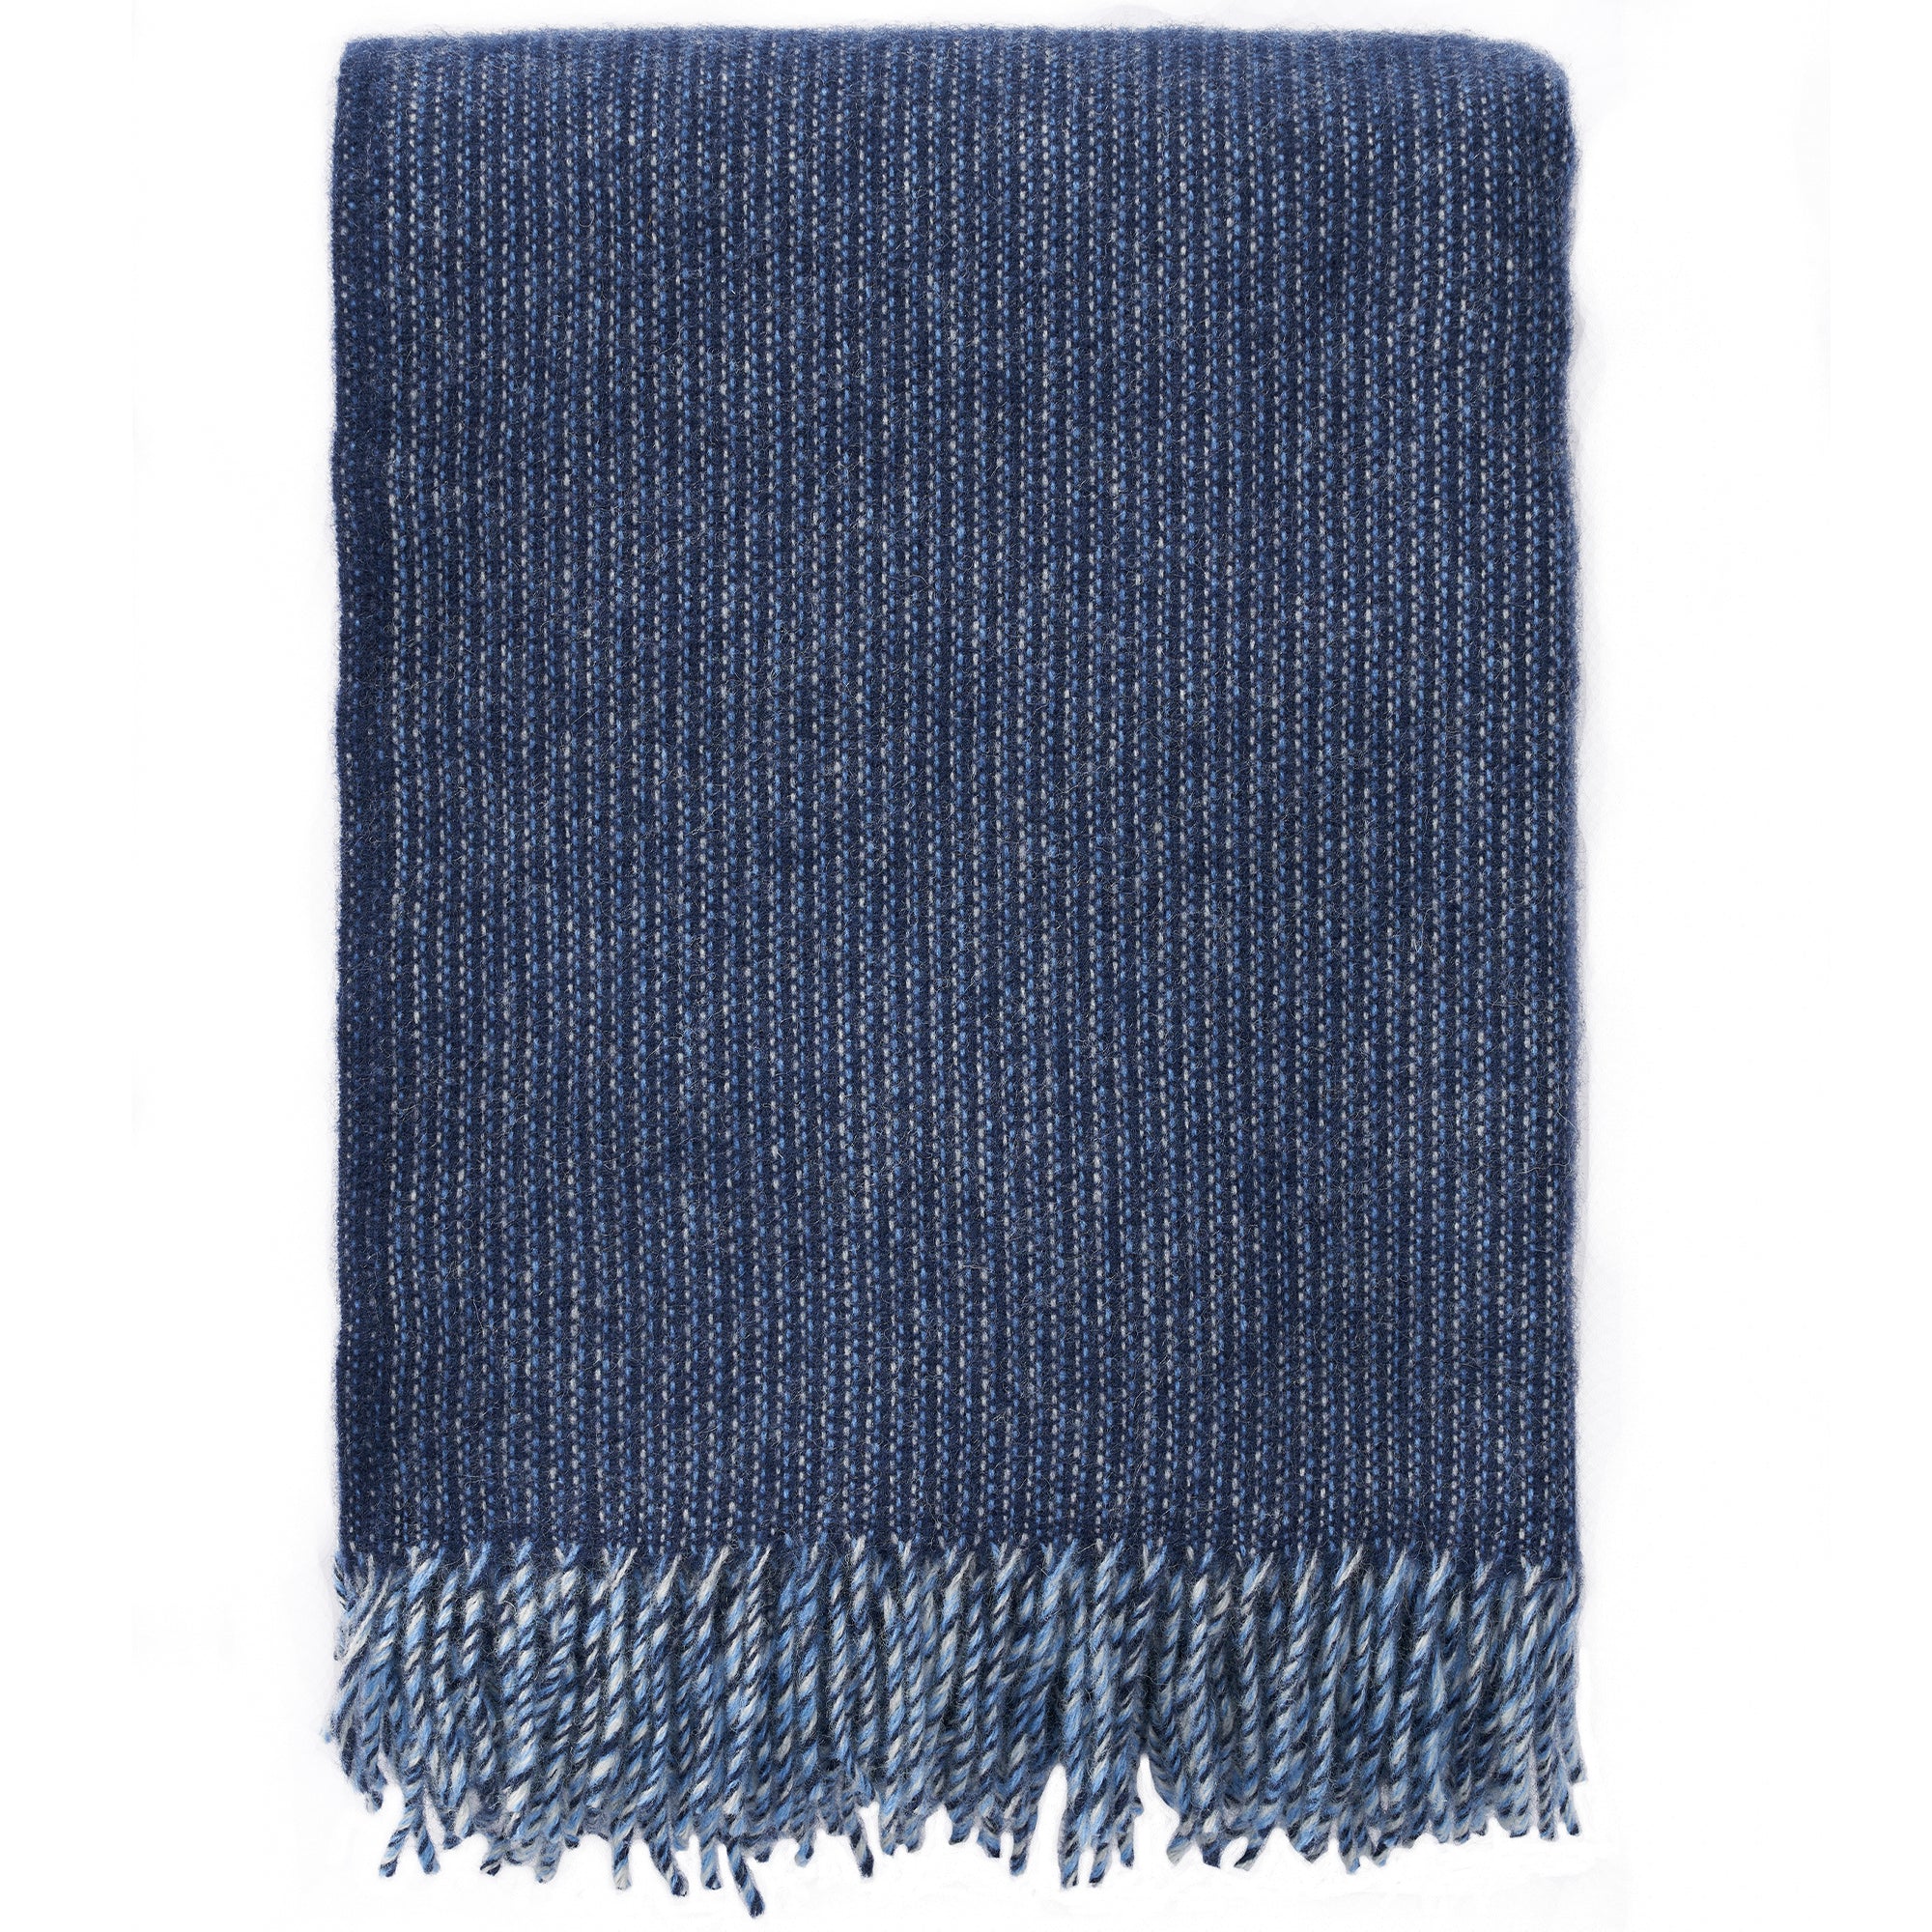 Shimmer Blue 130x200cm Brushed Lambswool Throw